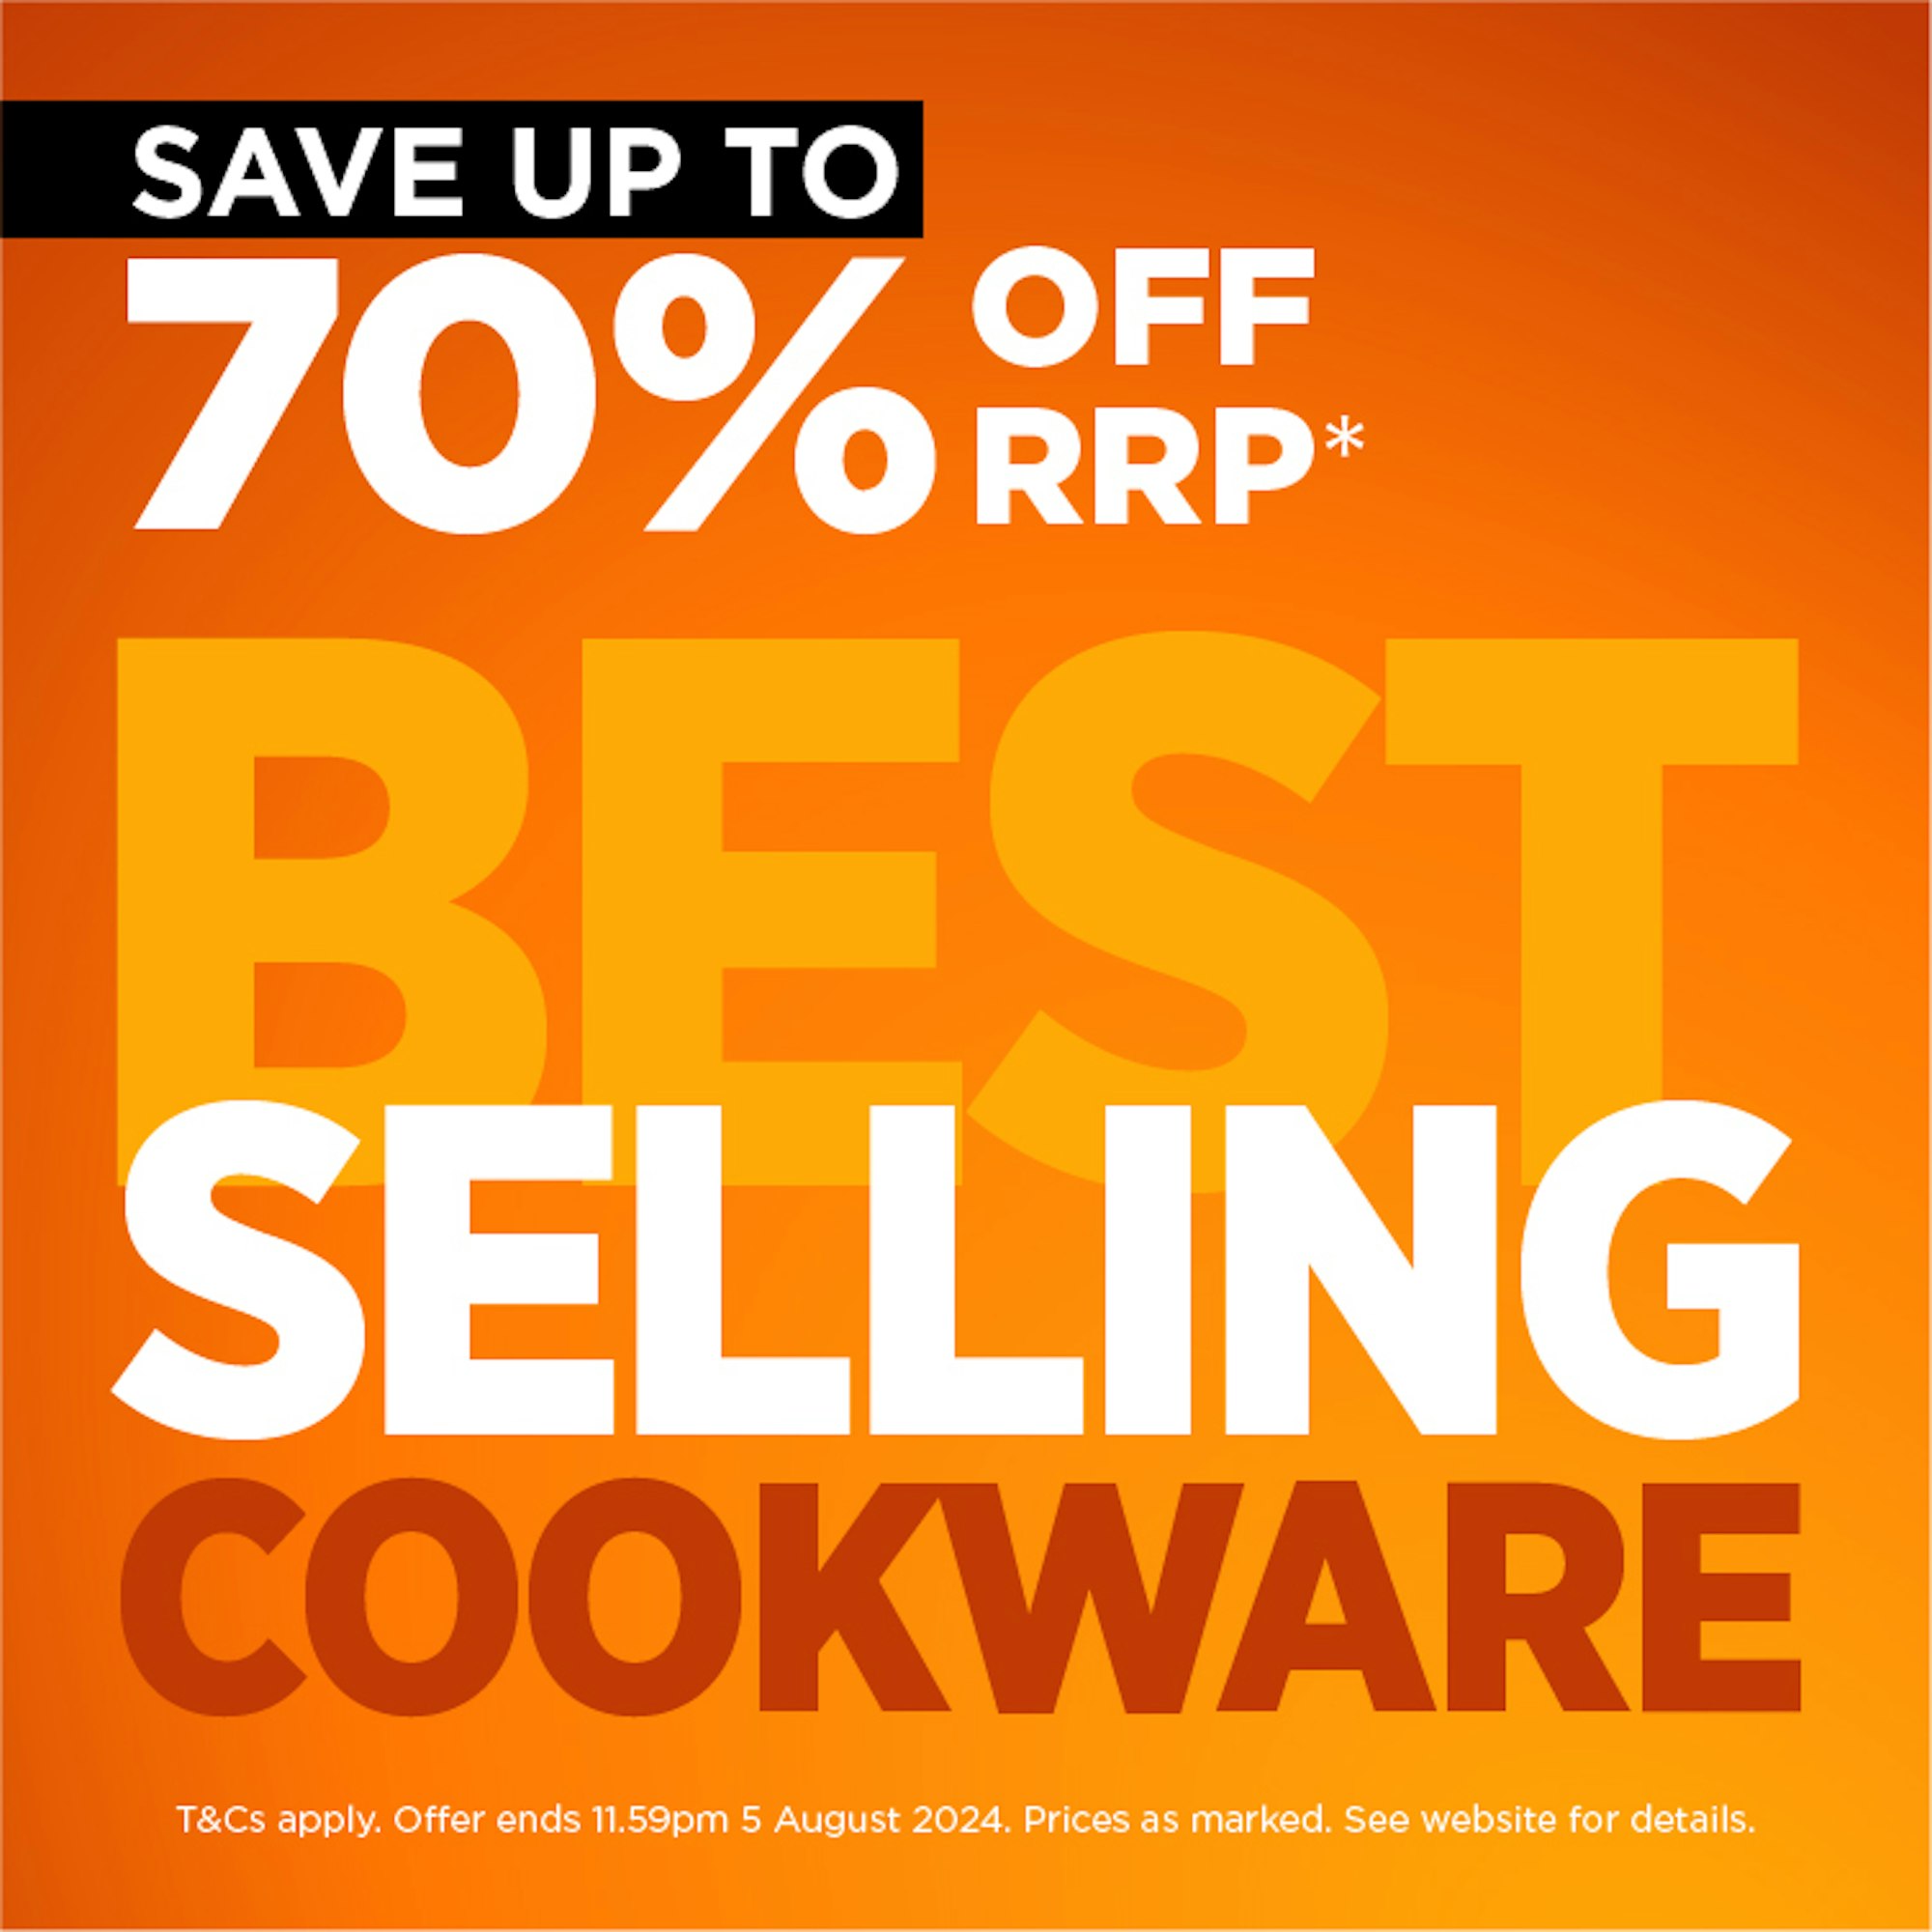 SAVE UP TO 70% OFF BEST SELLING COOKWARE